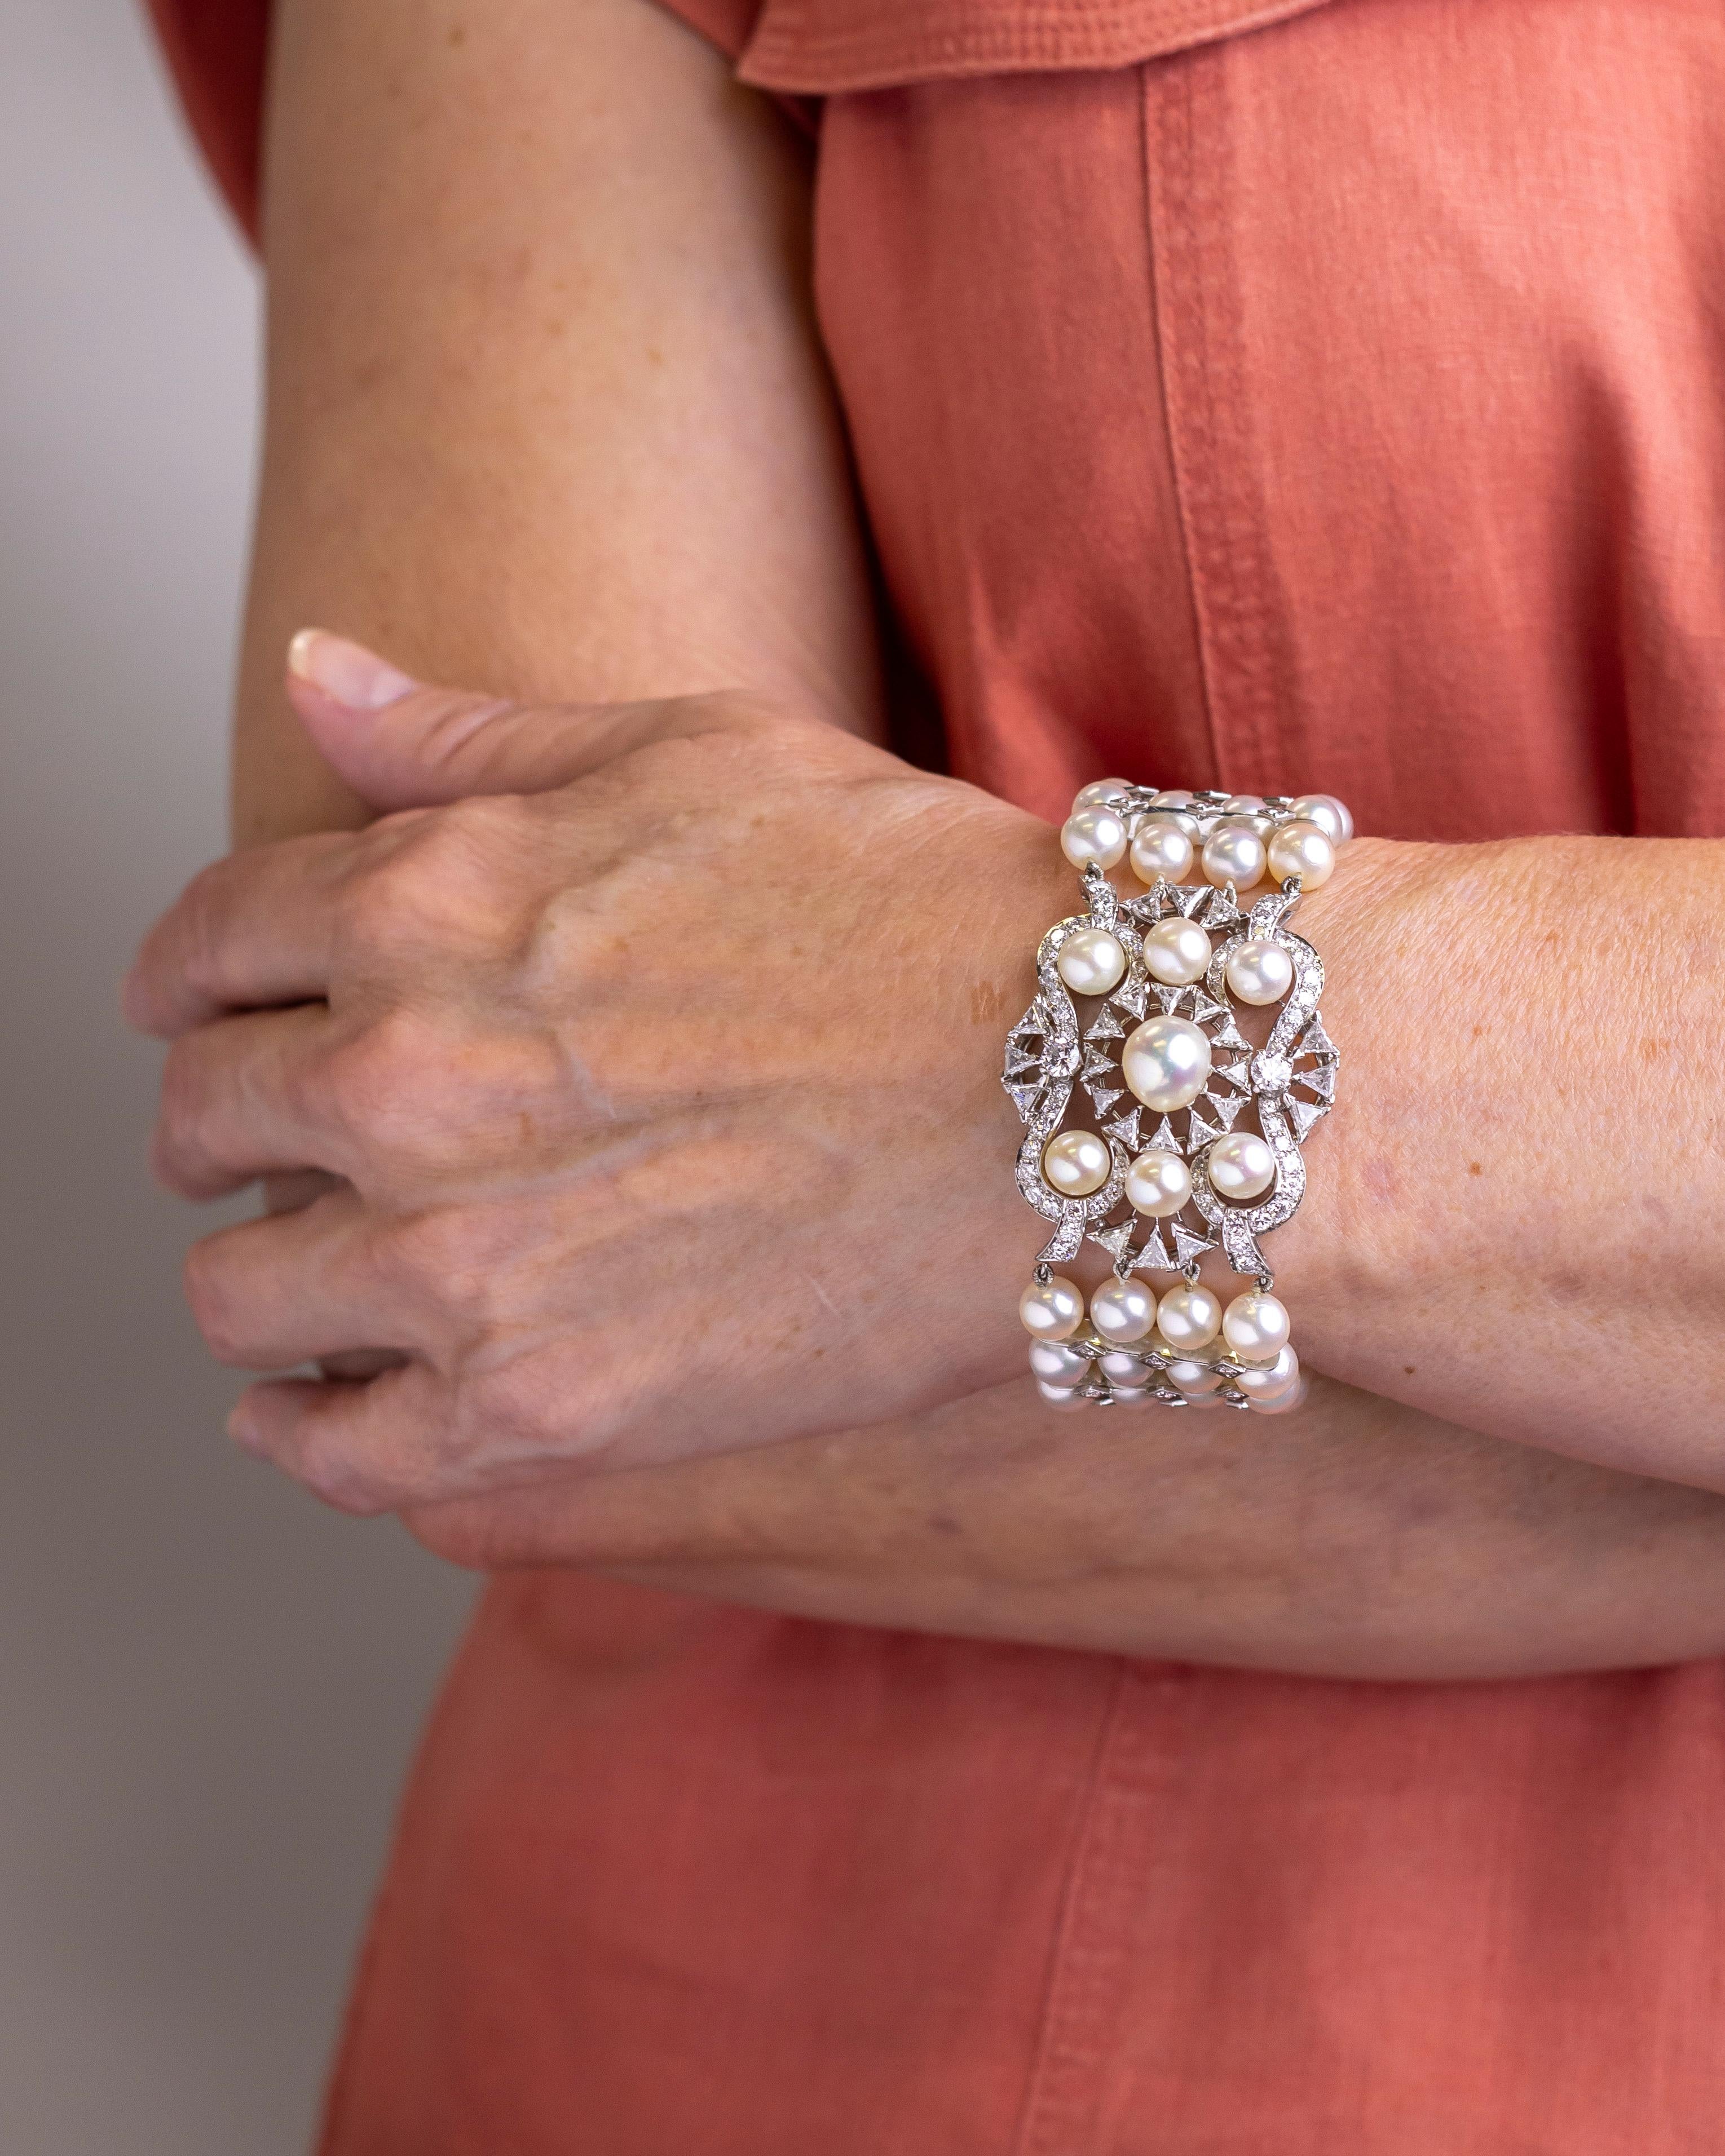 This knockout bracelet which dates to the 1960s was retailed by Miami based jeweller David R. Balogh and has been crafted from platinum, diamonds and cultured pearls. The bracelet has a central plaque that features a cluster of diamonds and pearls,